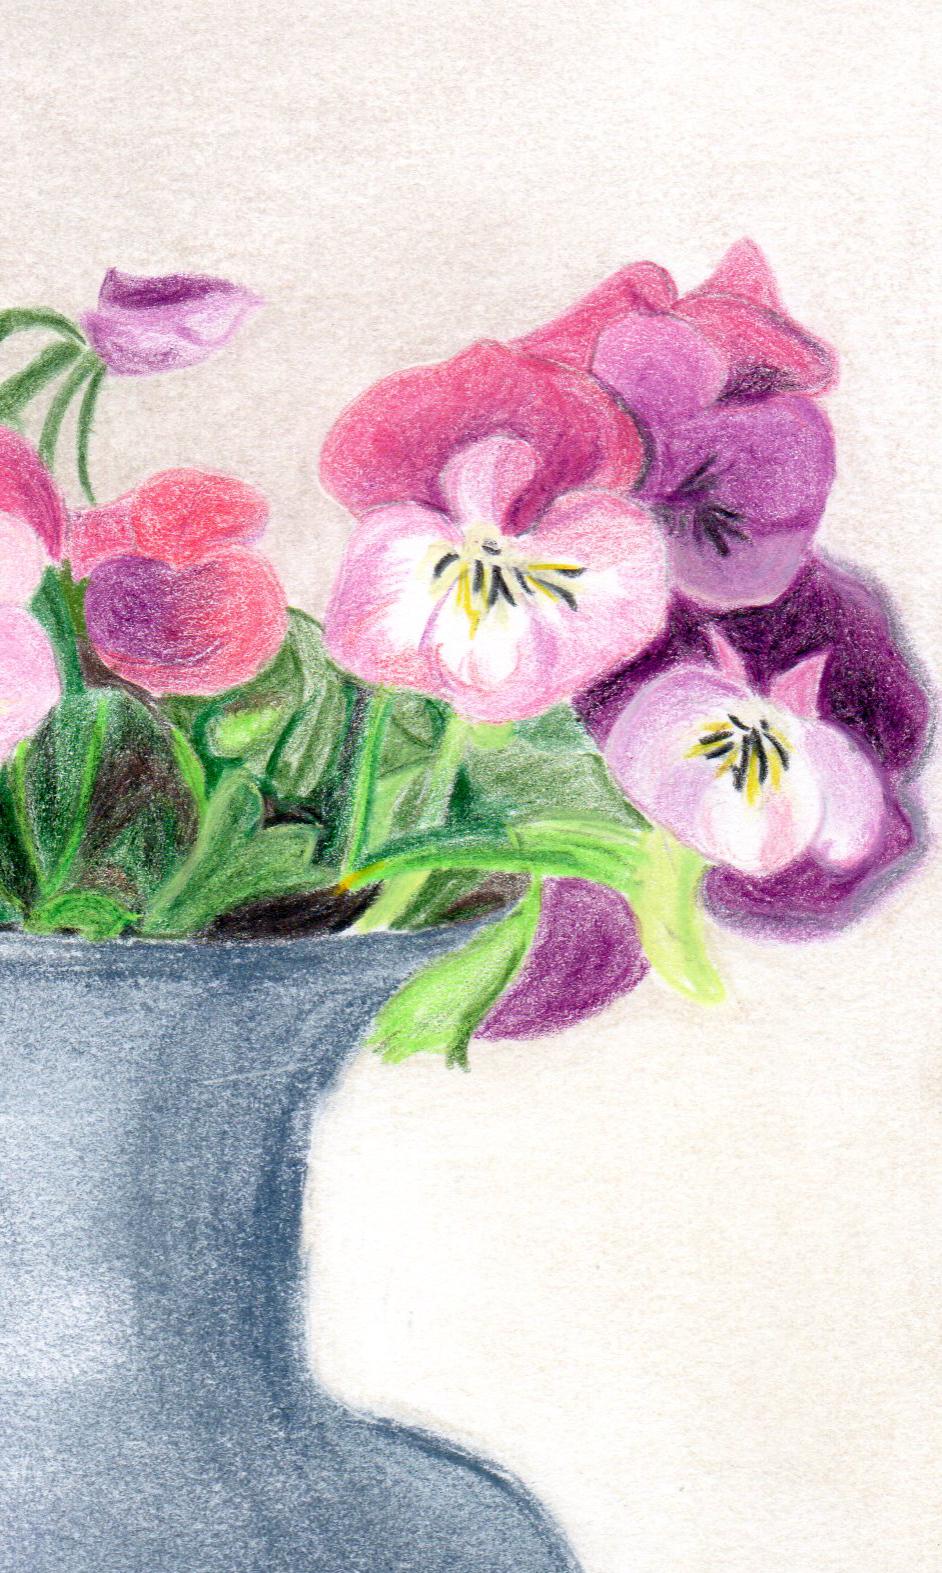 Pansy with Vase - Original Drawing, Pastel, flowers, Interior - Gray Interior Art by Gabriel Riesnert